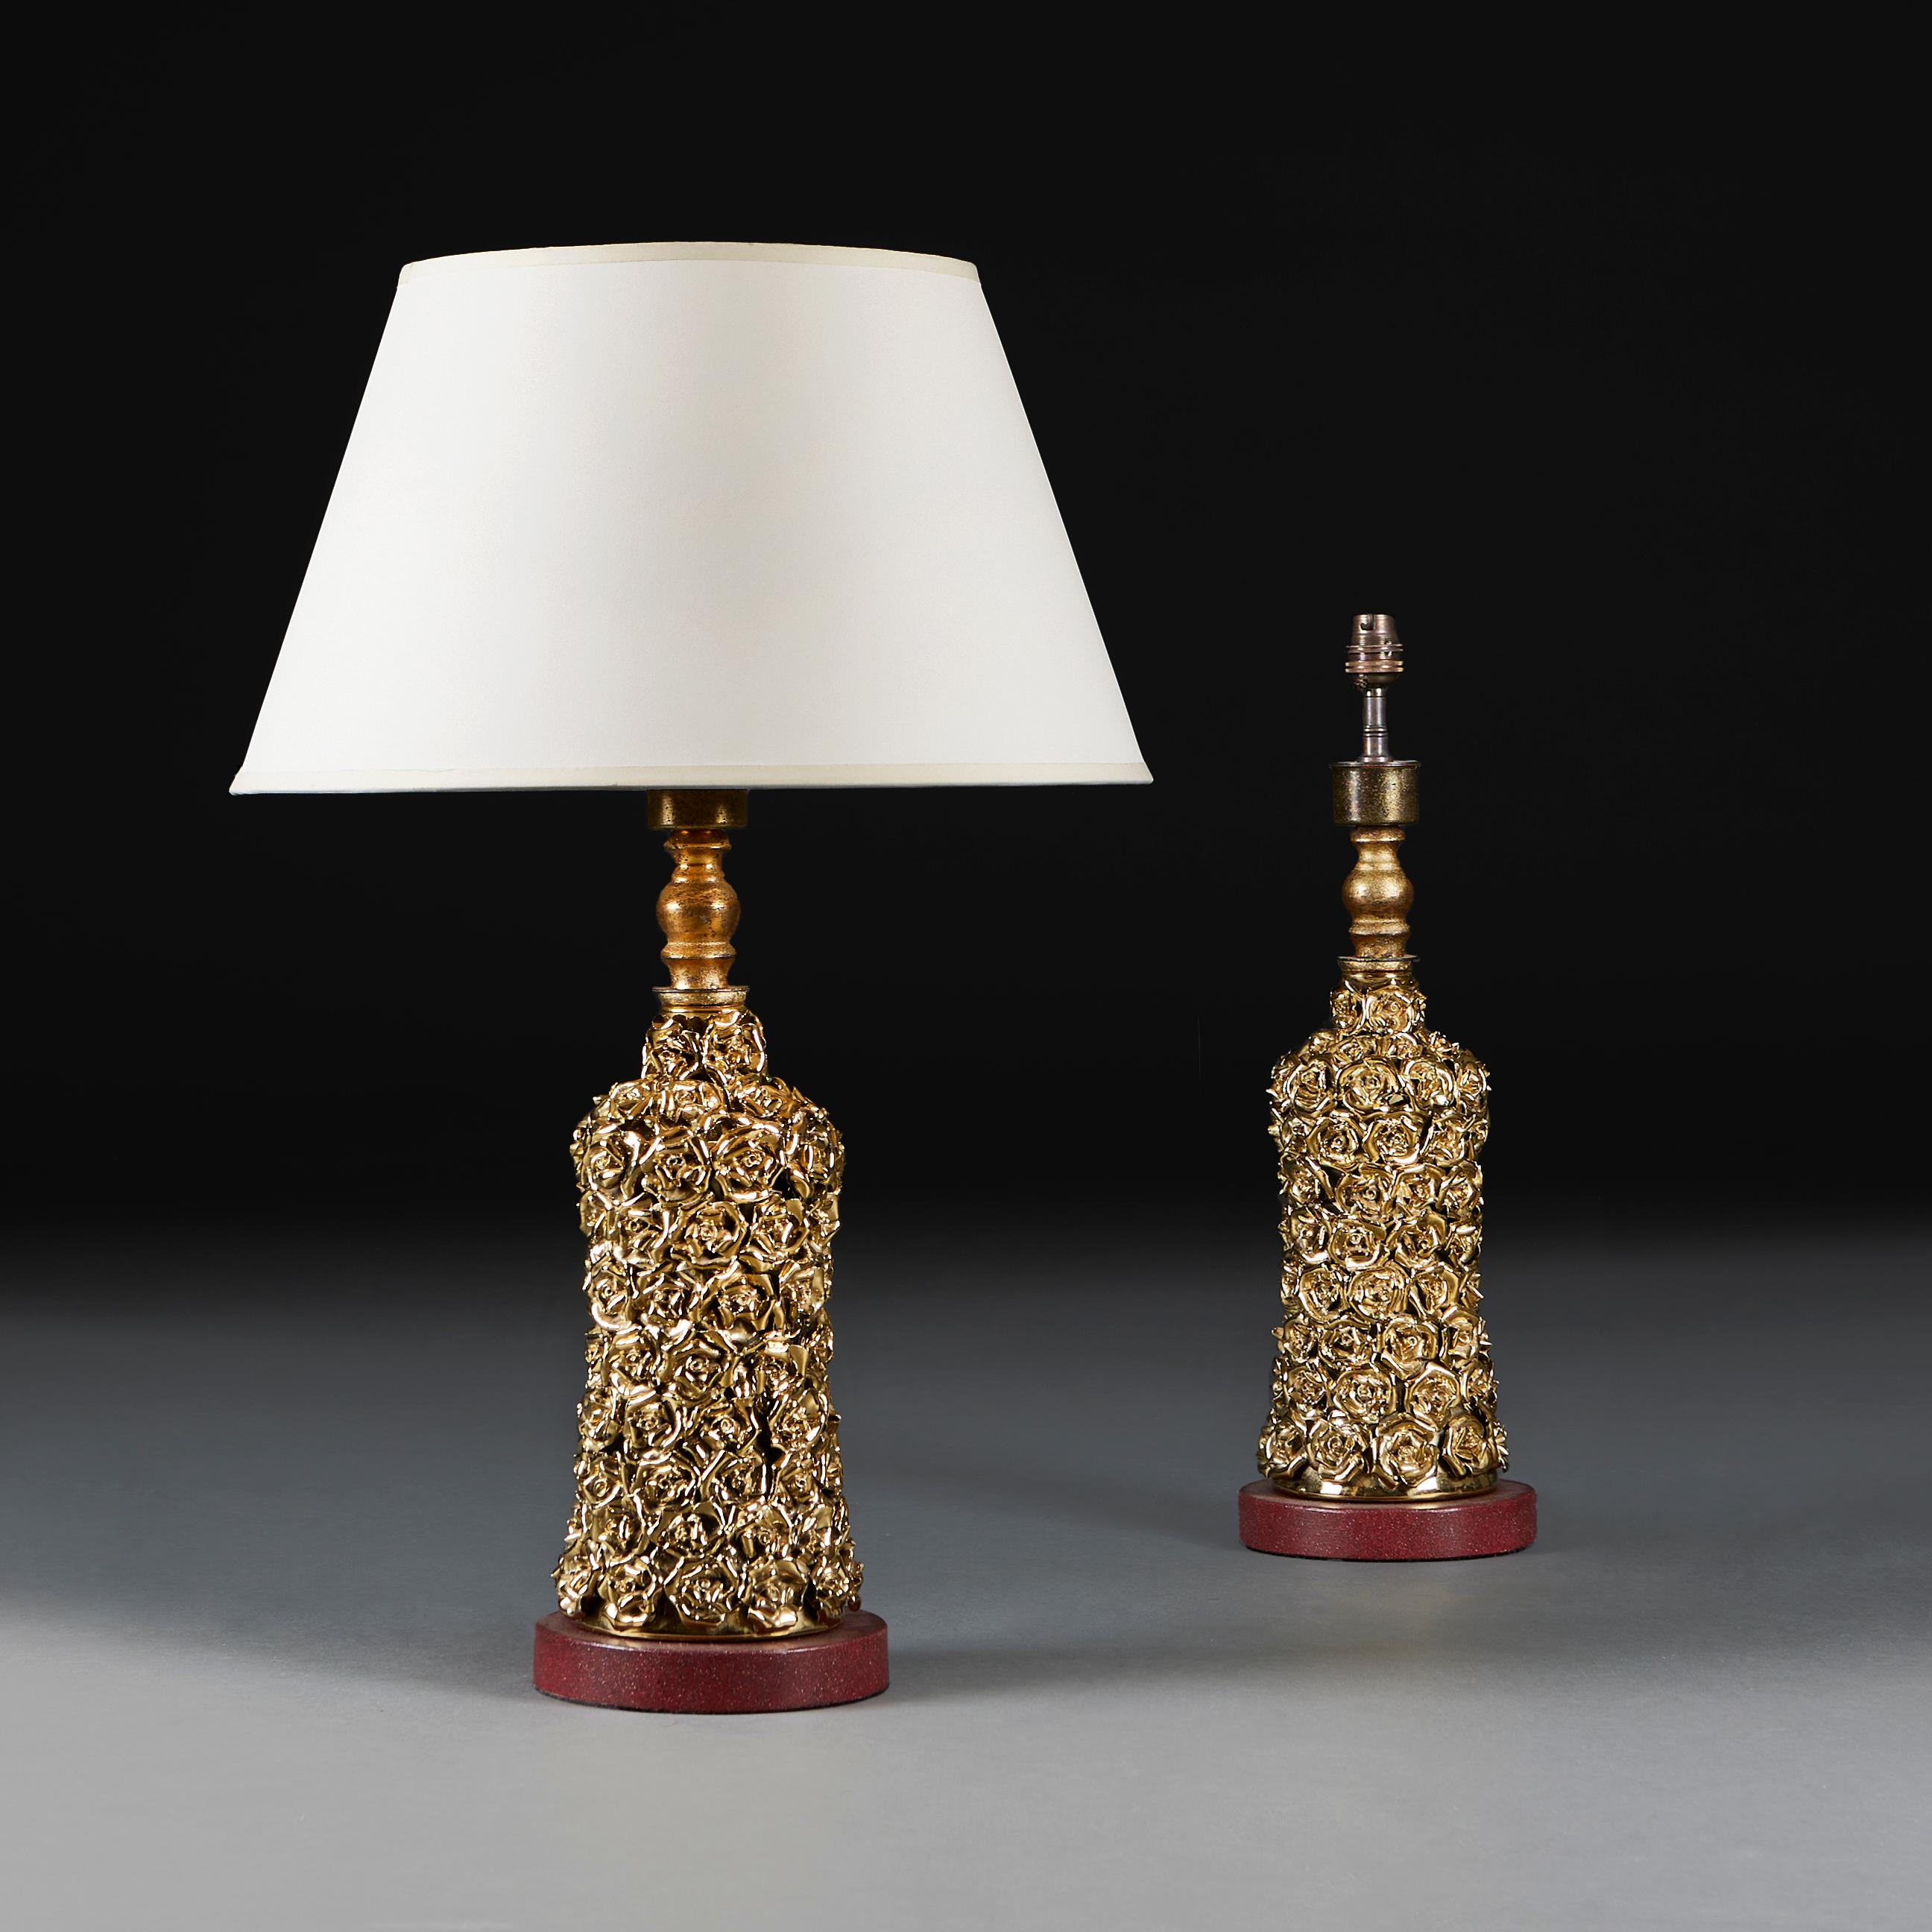 Italy, circa 1950
A unusual pair of mid twentieth century Hollywood Regency lamps, the bodies embellished with gilded porcelain roses throughout, and mounted on faux porphyry circular bases.

Height of lamp    41.00cm
Height with shade 